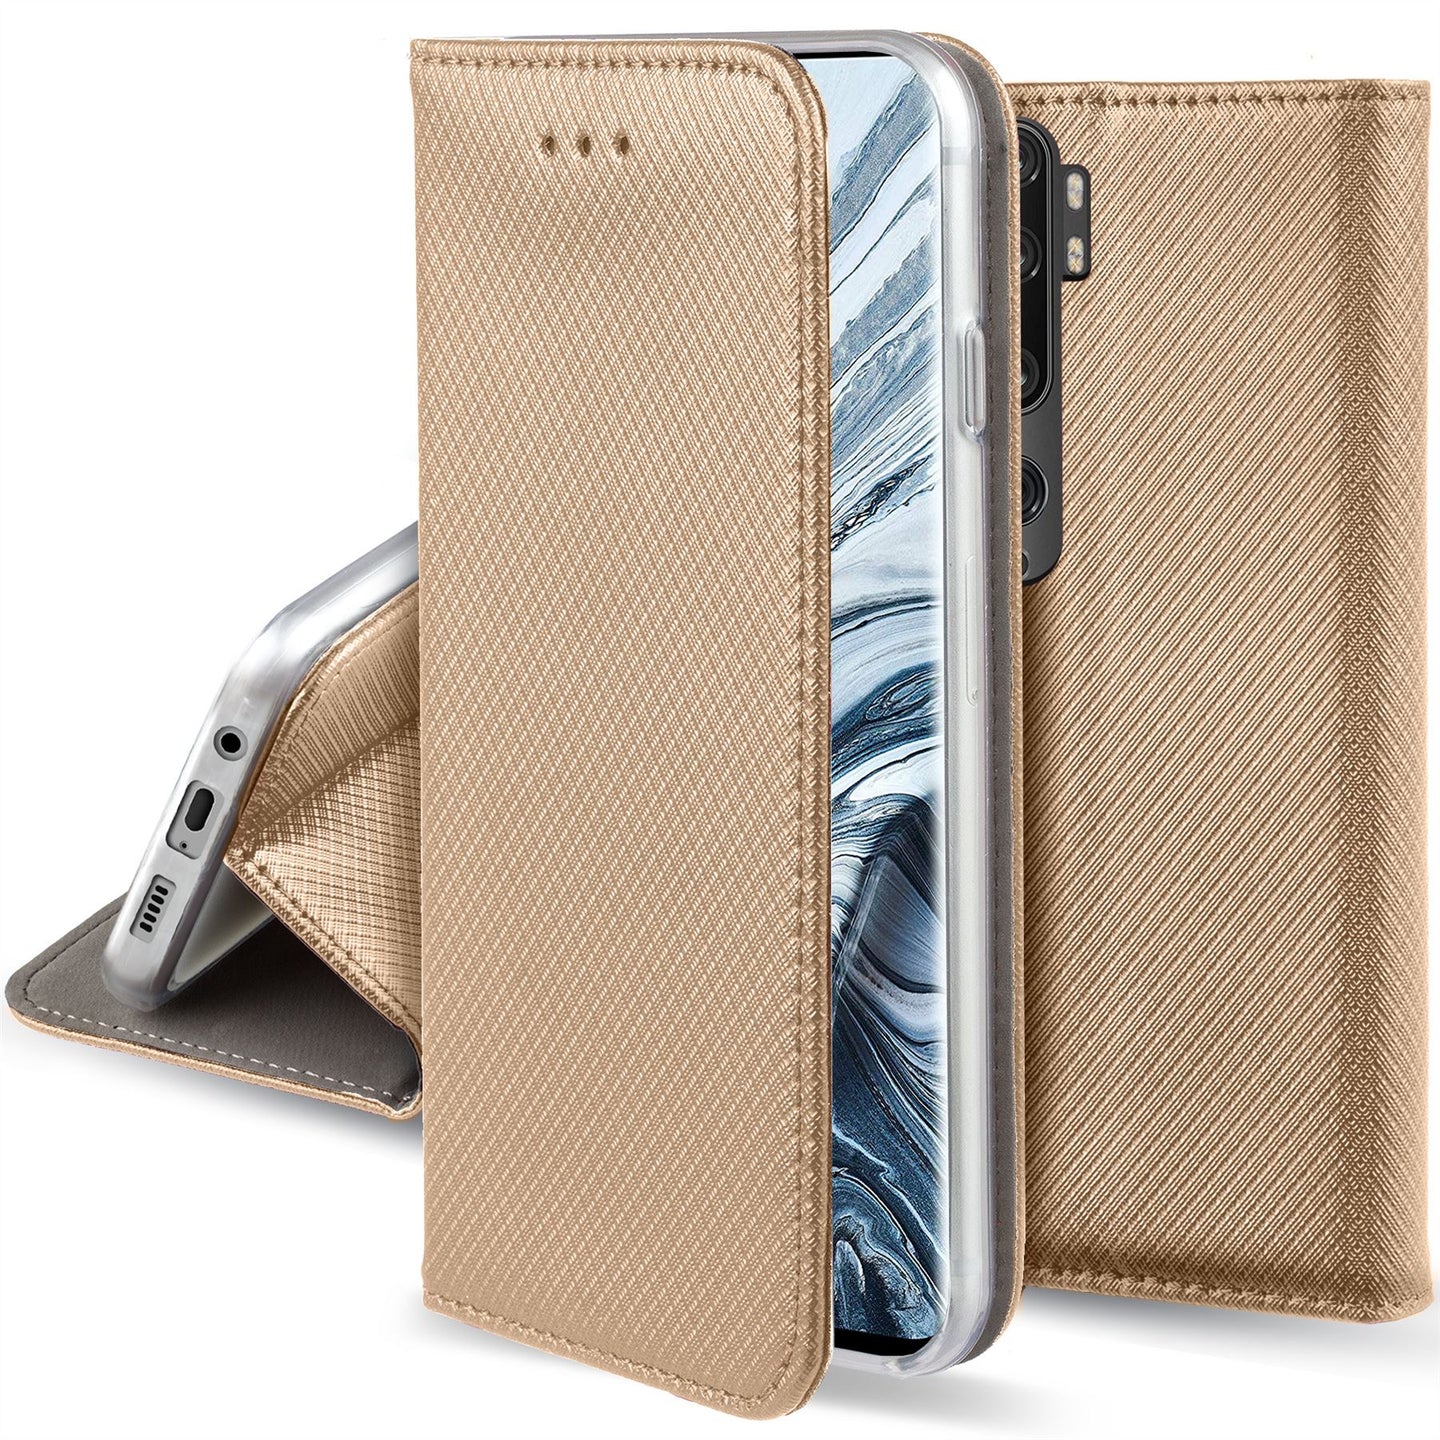 Moozy Case Flip Cover for Xiaomi Mi Note 10, Xiaomi Mi Note 10 Pro, Gold - Smart Magnetic Flip Case with Card Holder and Stand